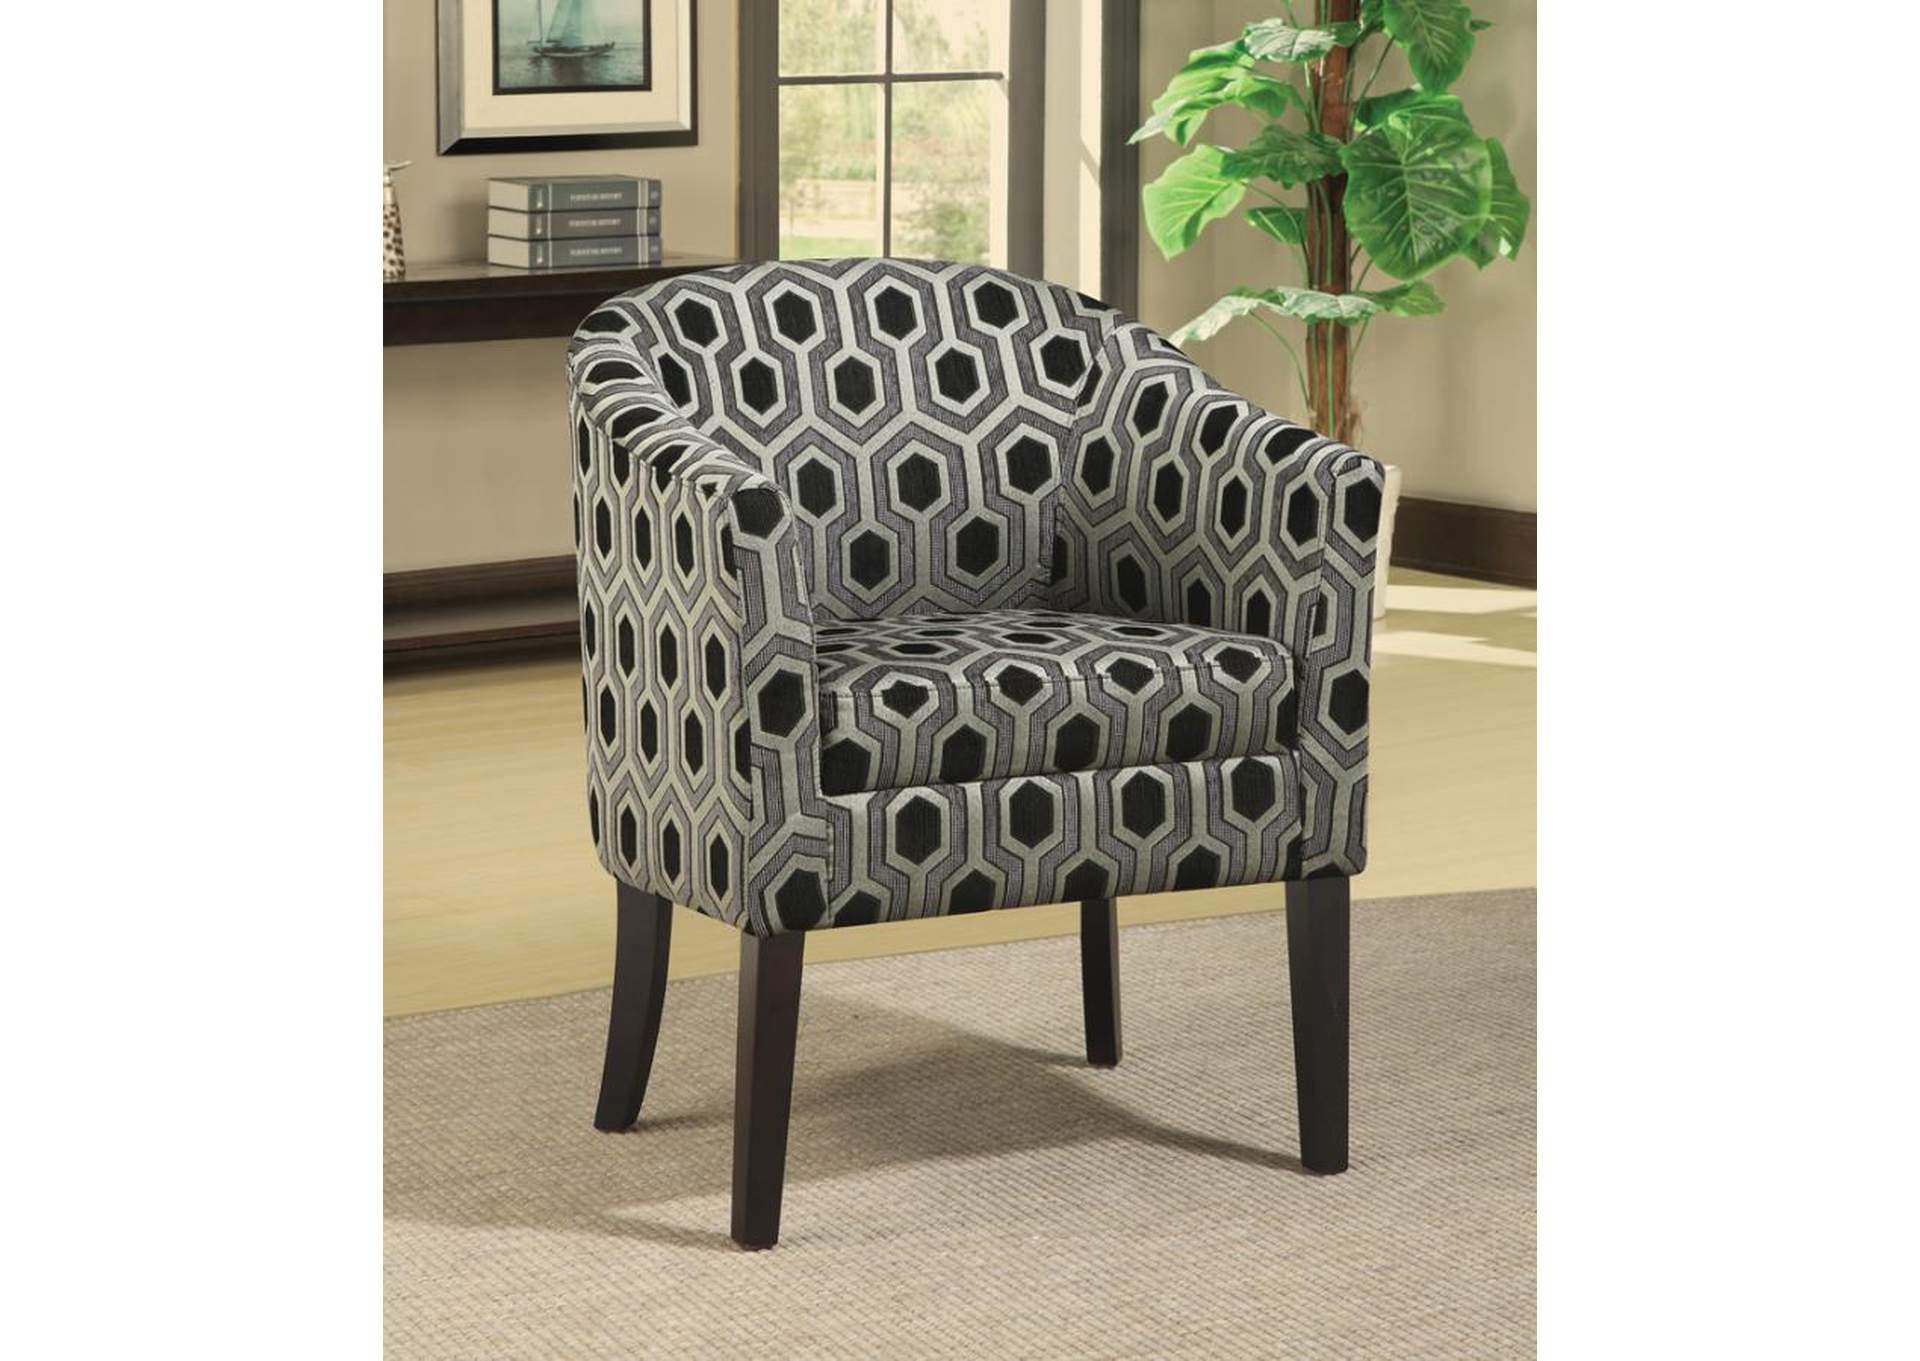 Jansen Hexagon Patterned Accent Chair Grey and Black,Coaster Furniture